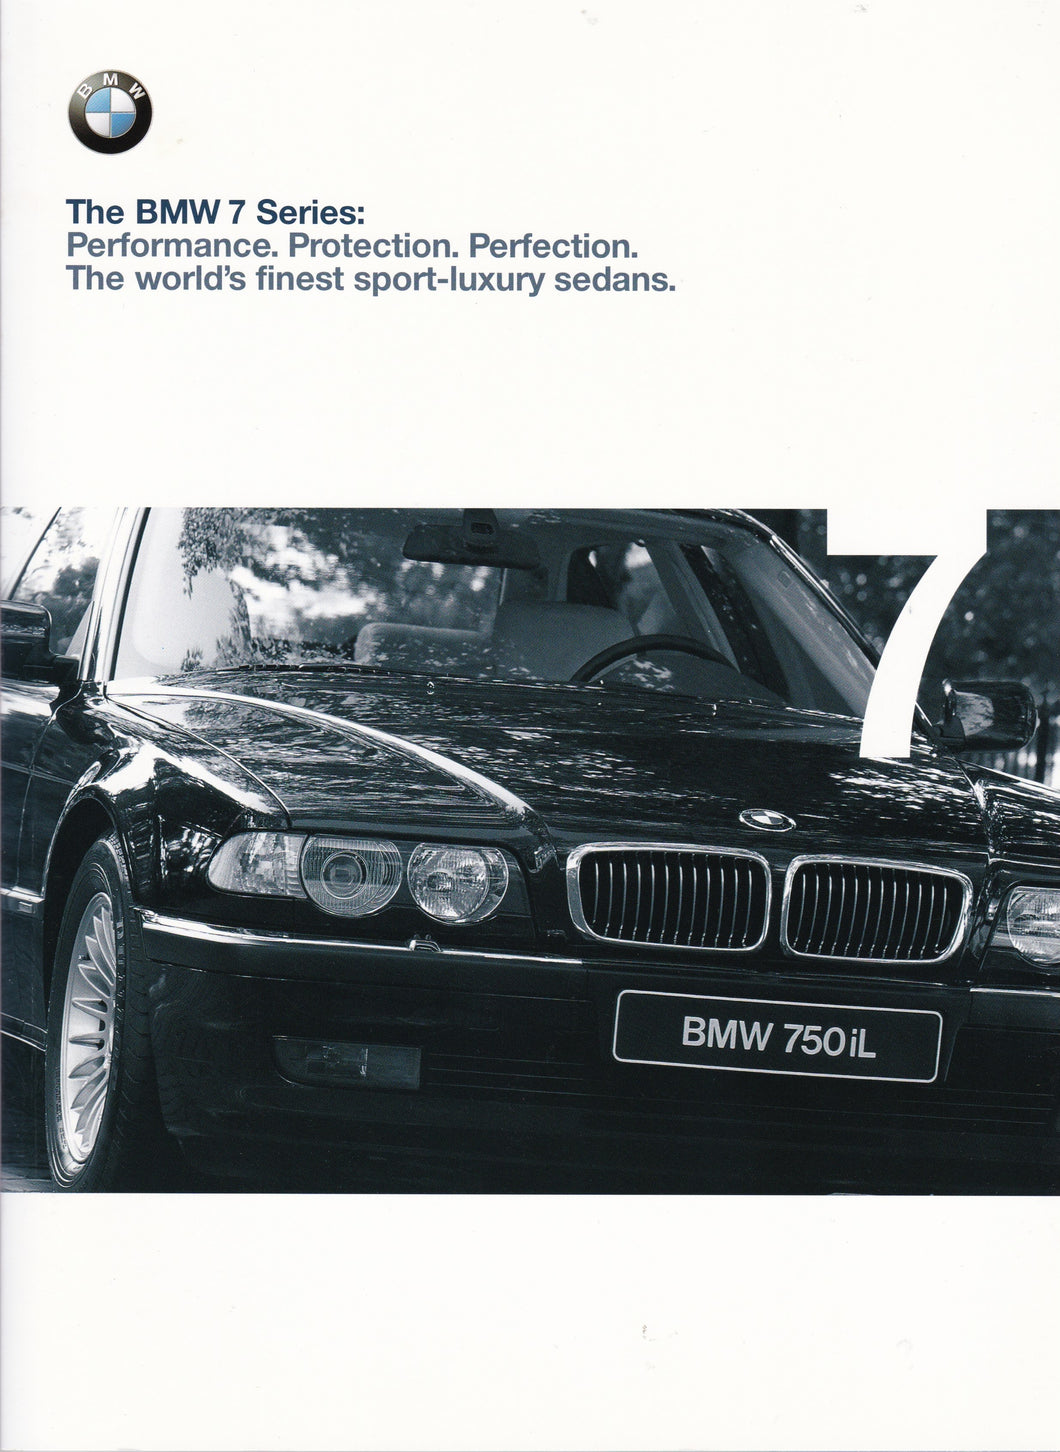 Brochure - The BMW 7 Series Performance. Protection. Perfection. (1999)